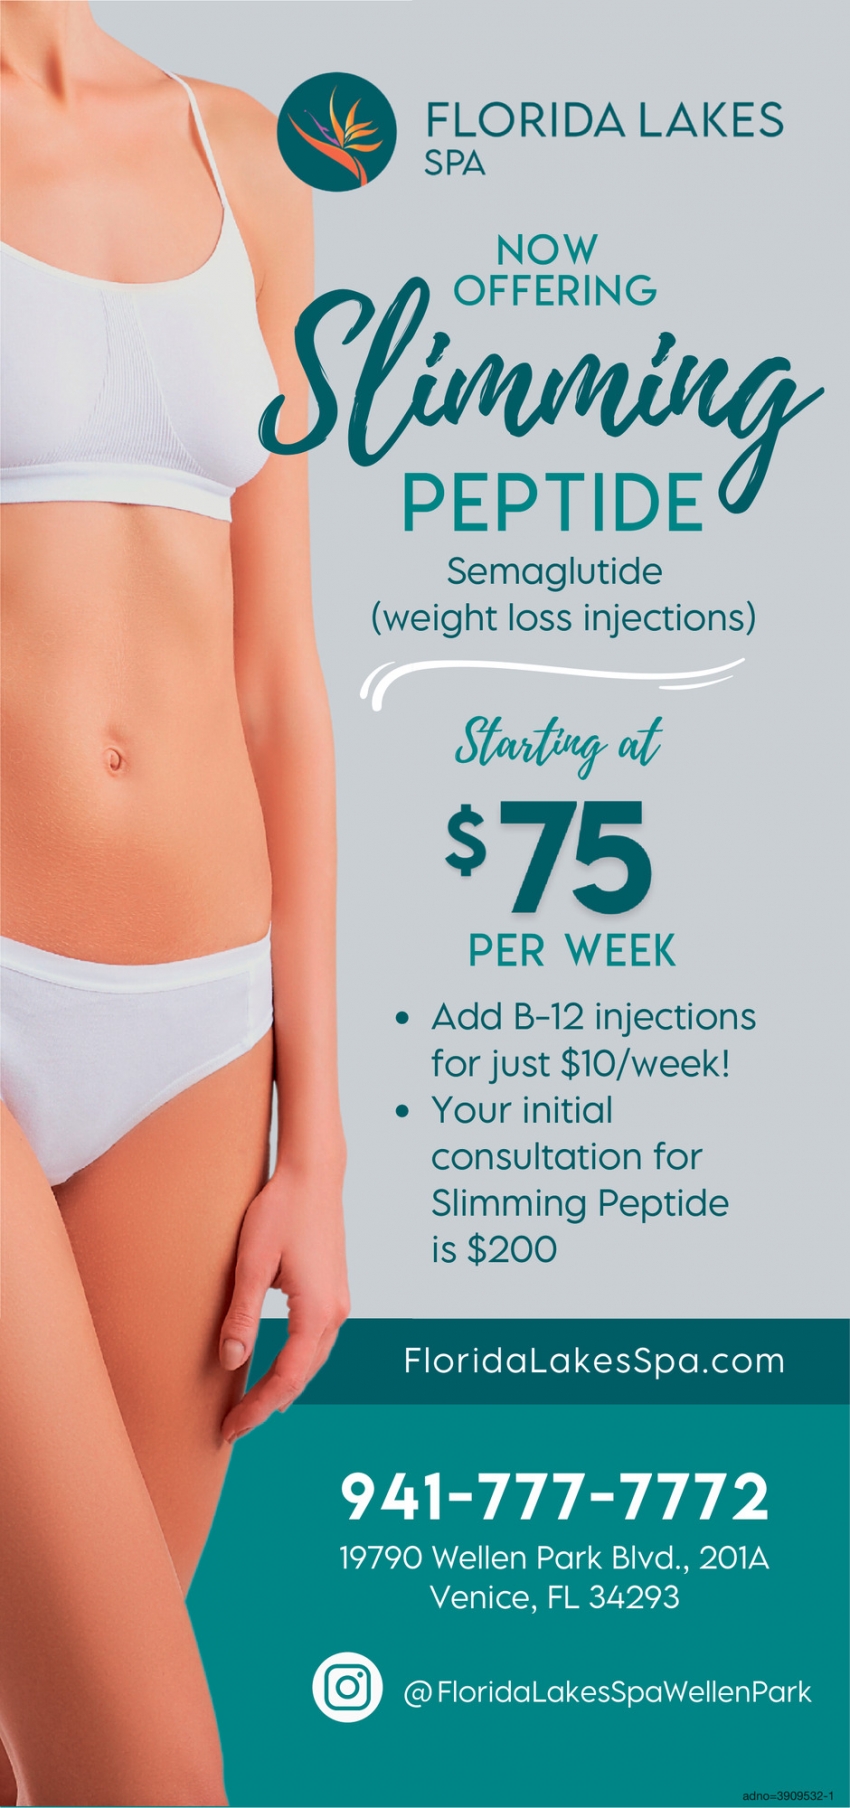 Now Offering Slimming Peptide